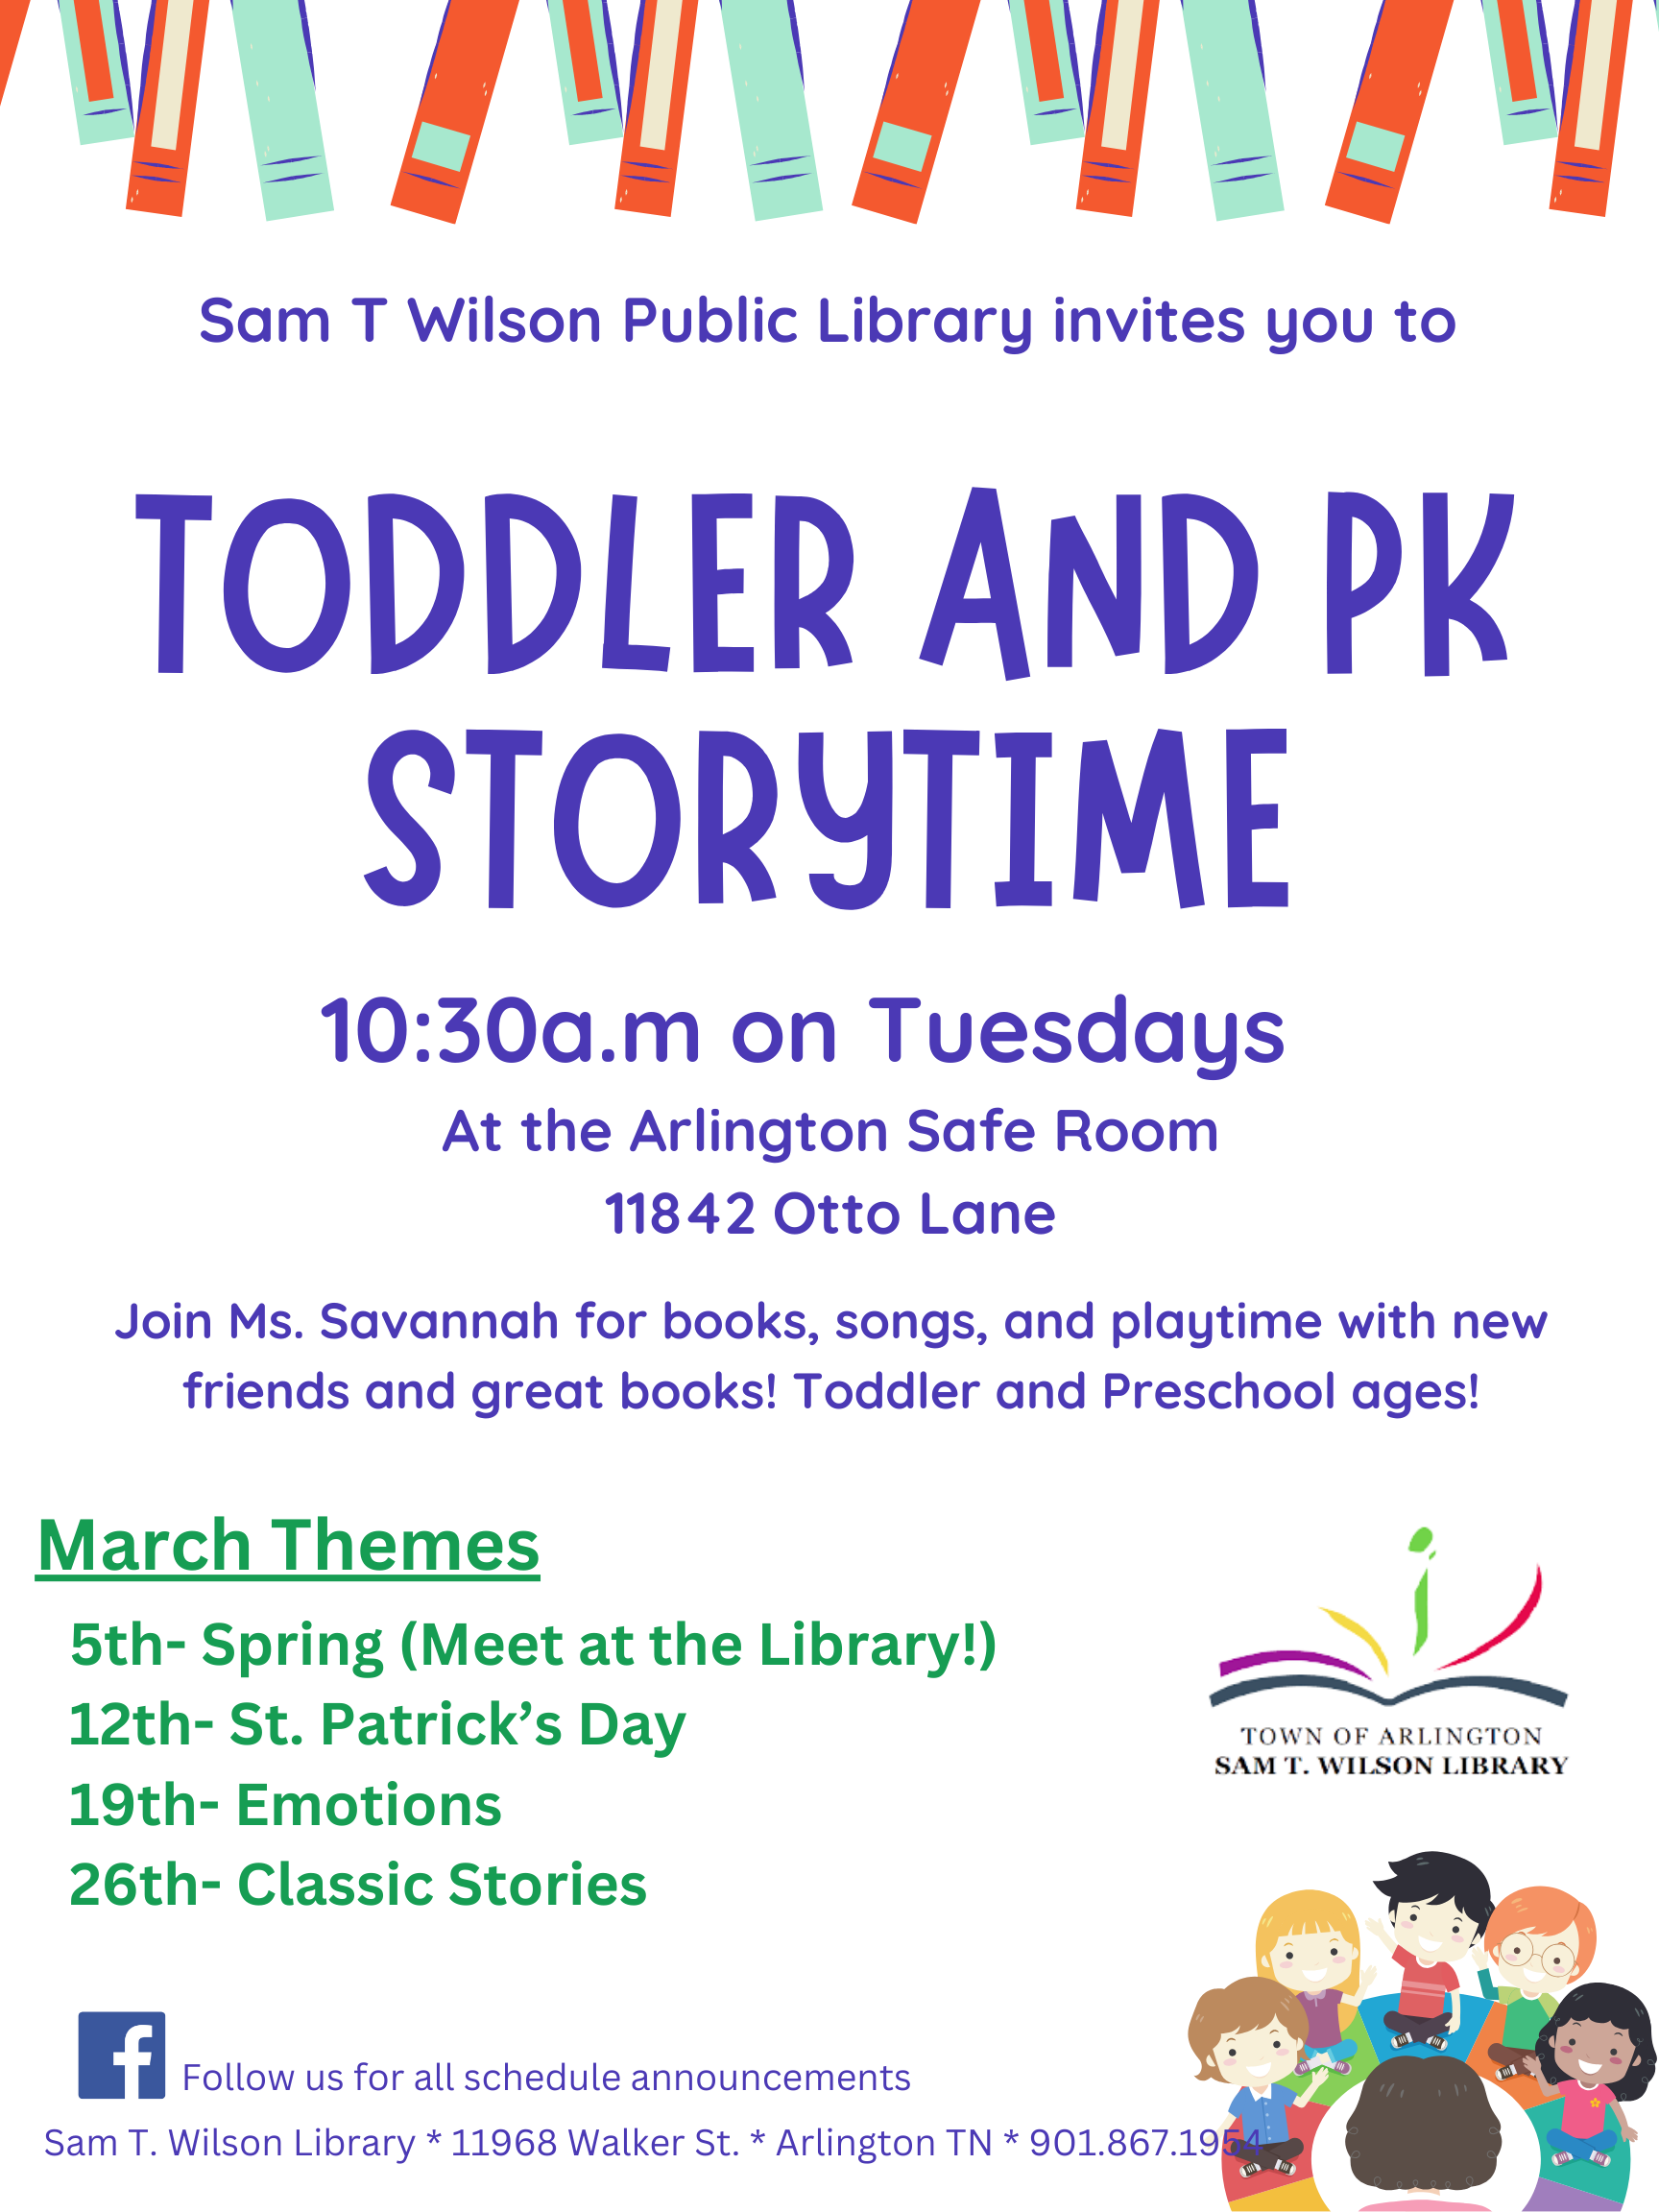 Toddler and PK storytime, 10:30am on Tuesdays at Arlington Safe Room at 11842 Otto Lane